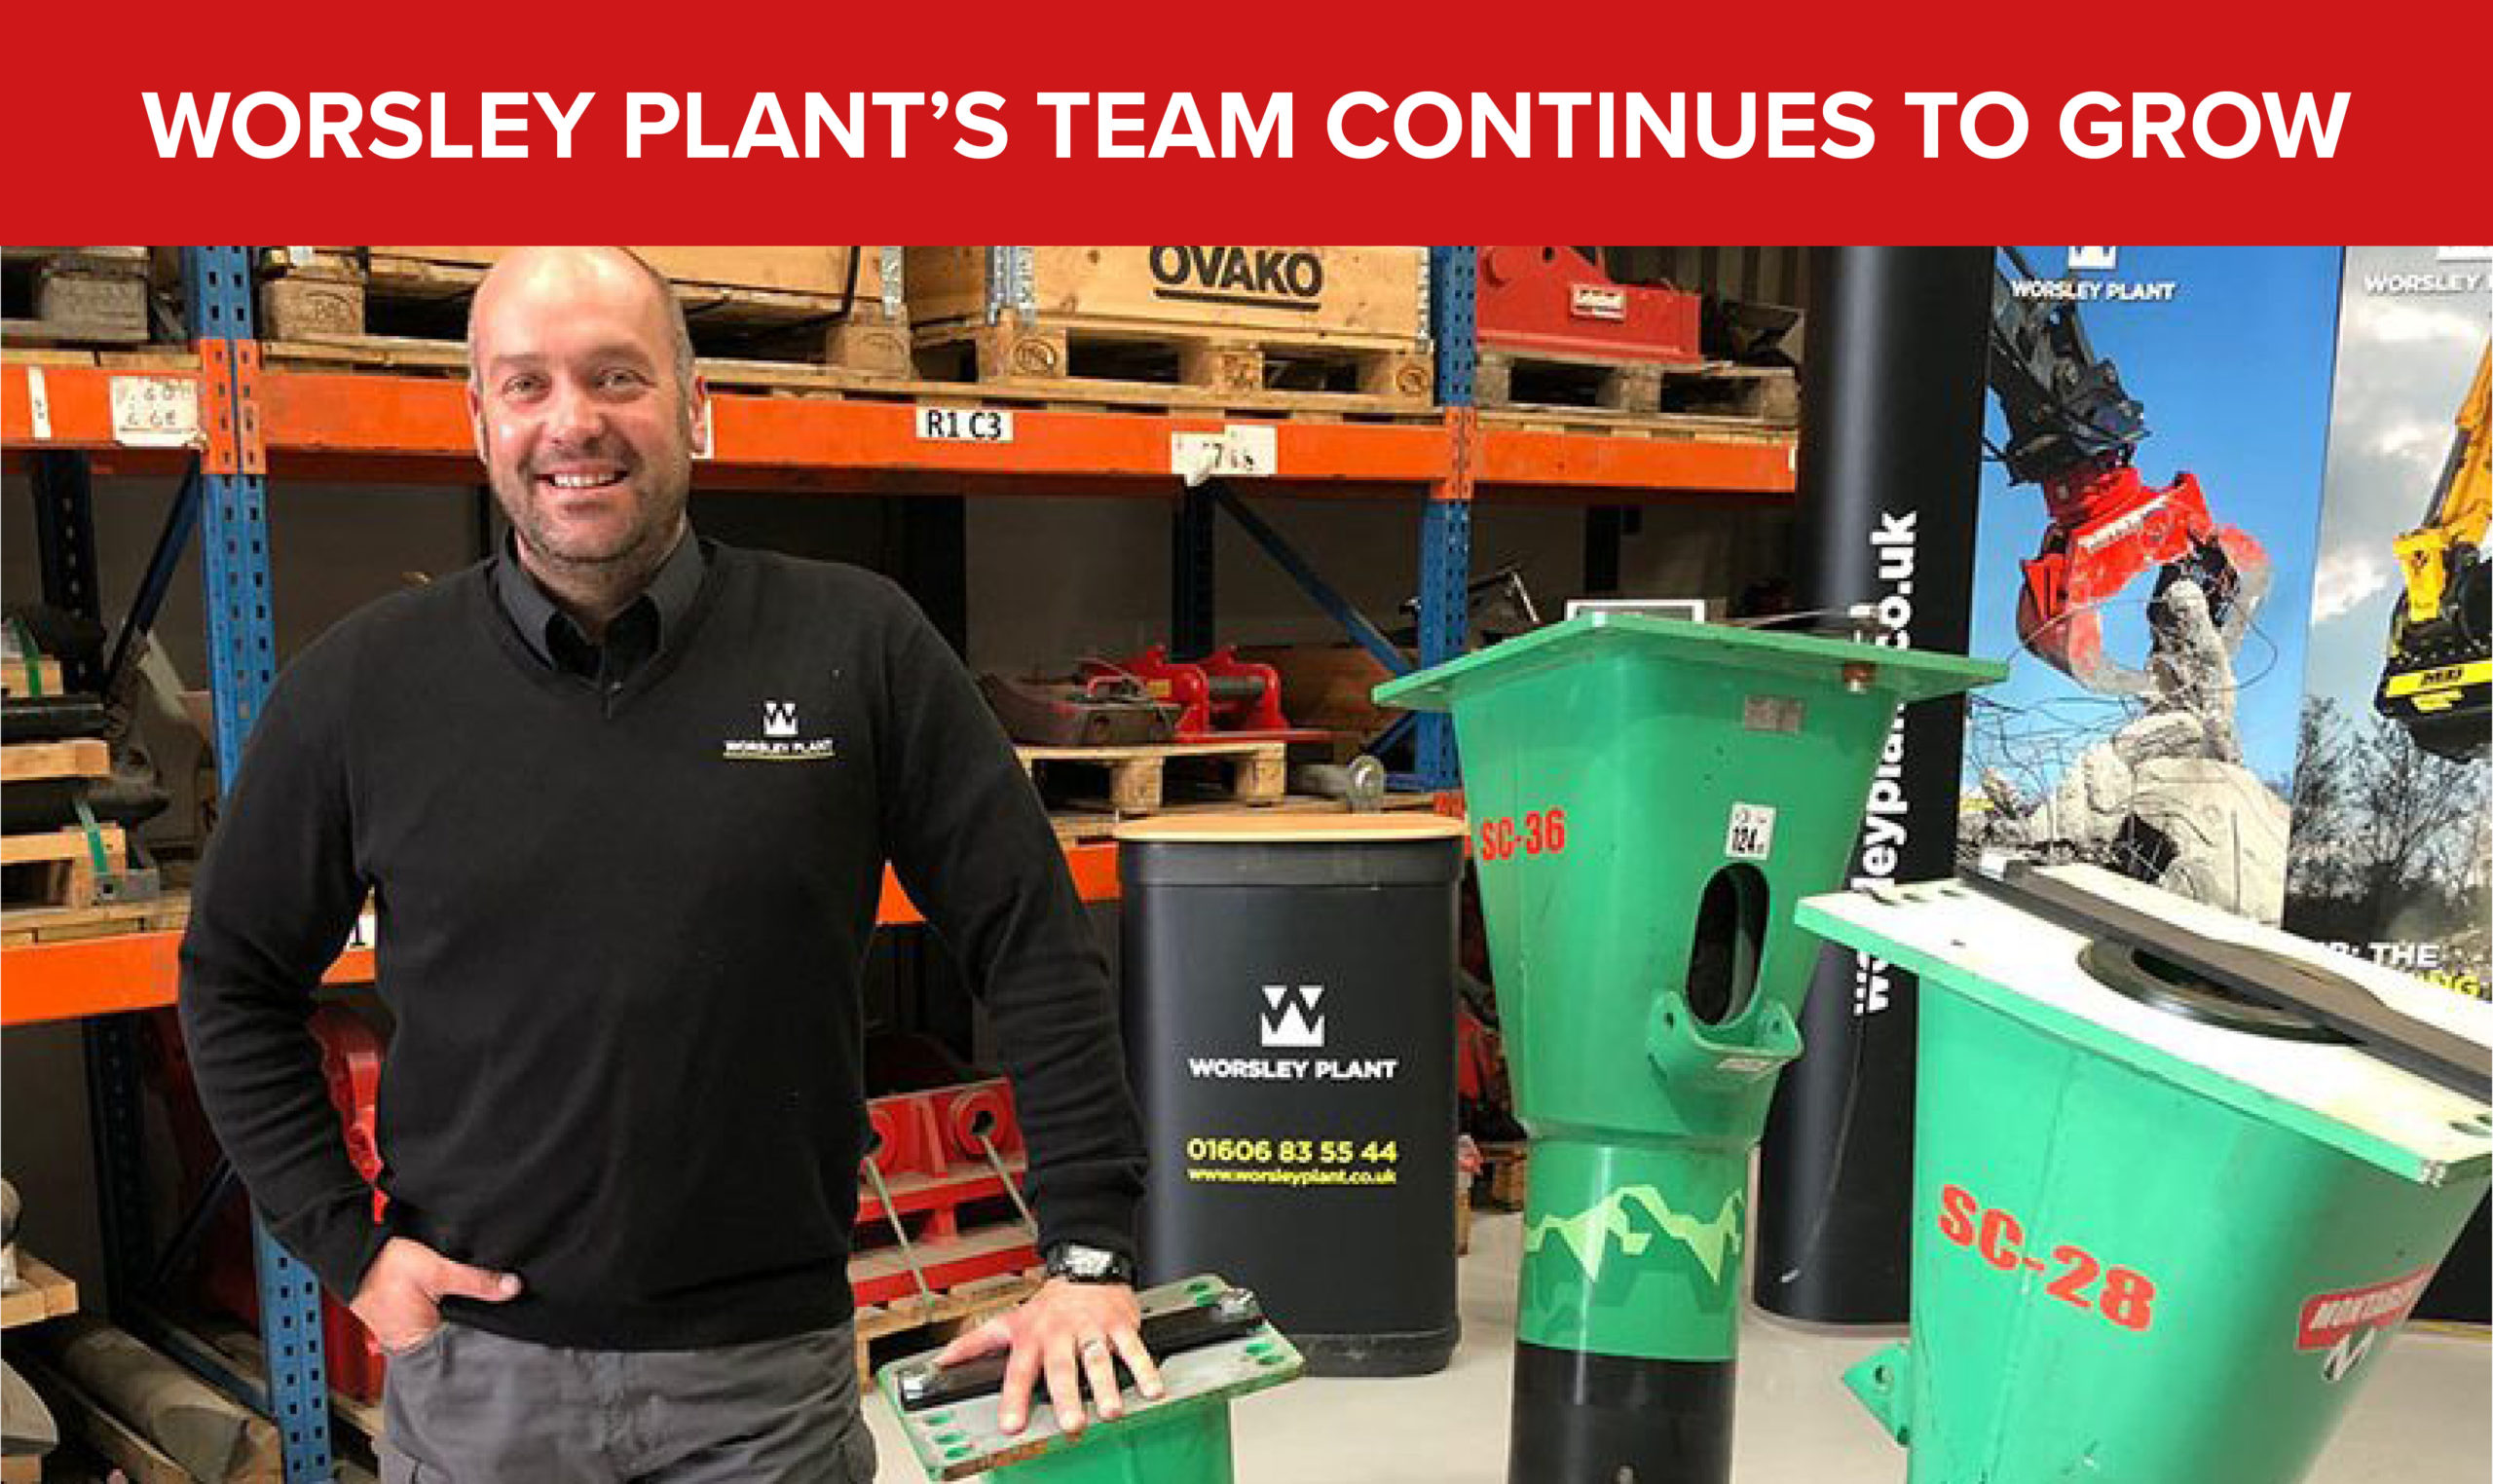 Worsley Plant’s Team Continues to Grow